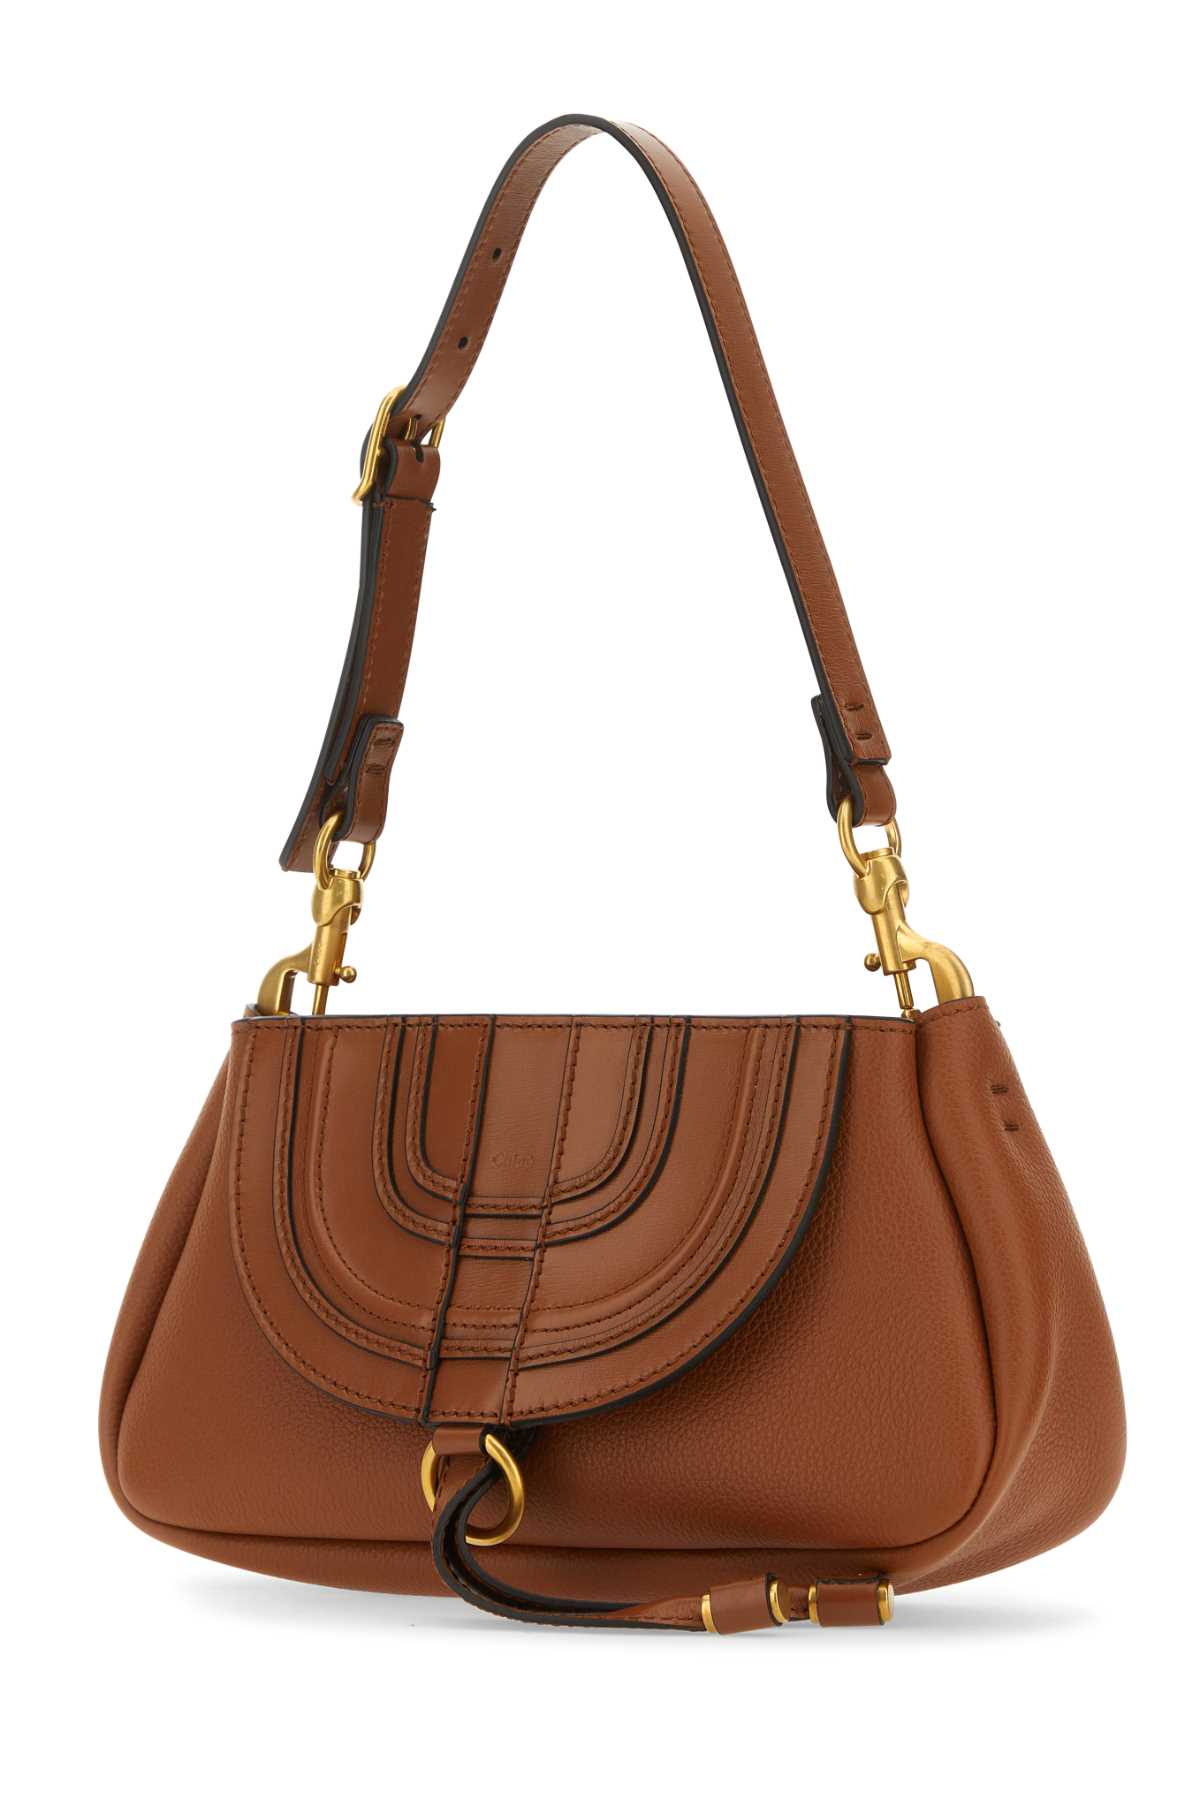 Chloé Brown Leather Small Marcie Clutch In Tan